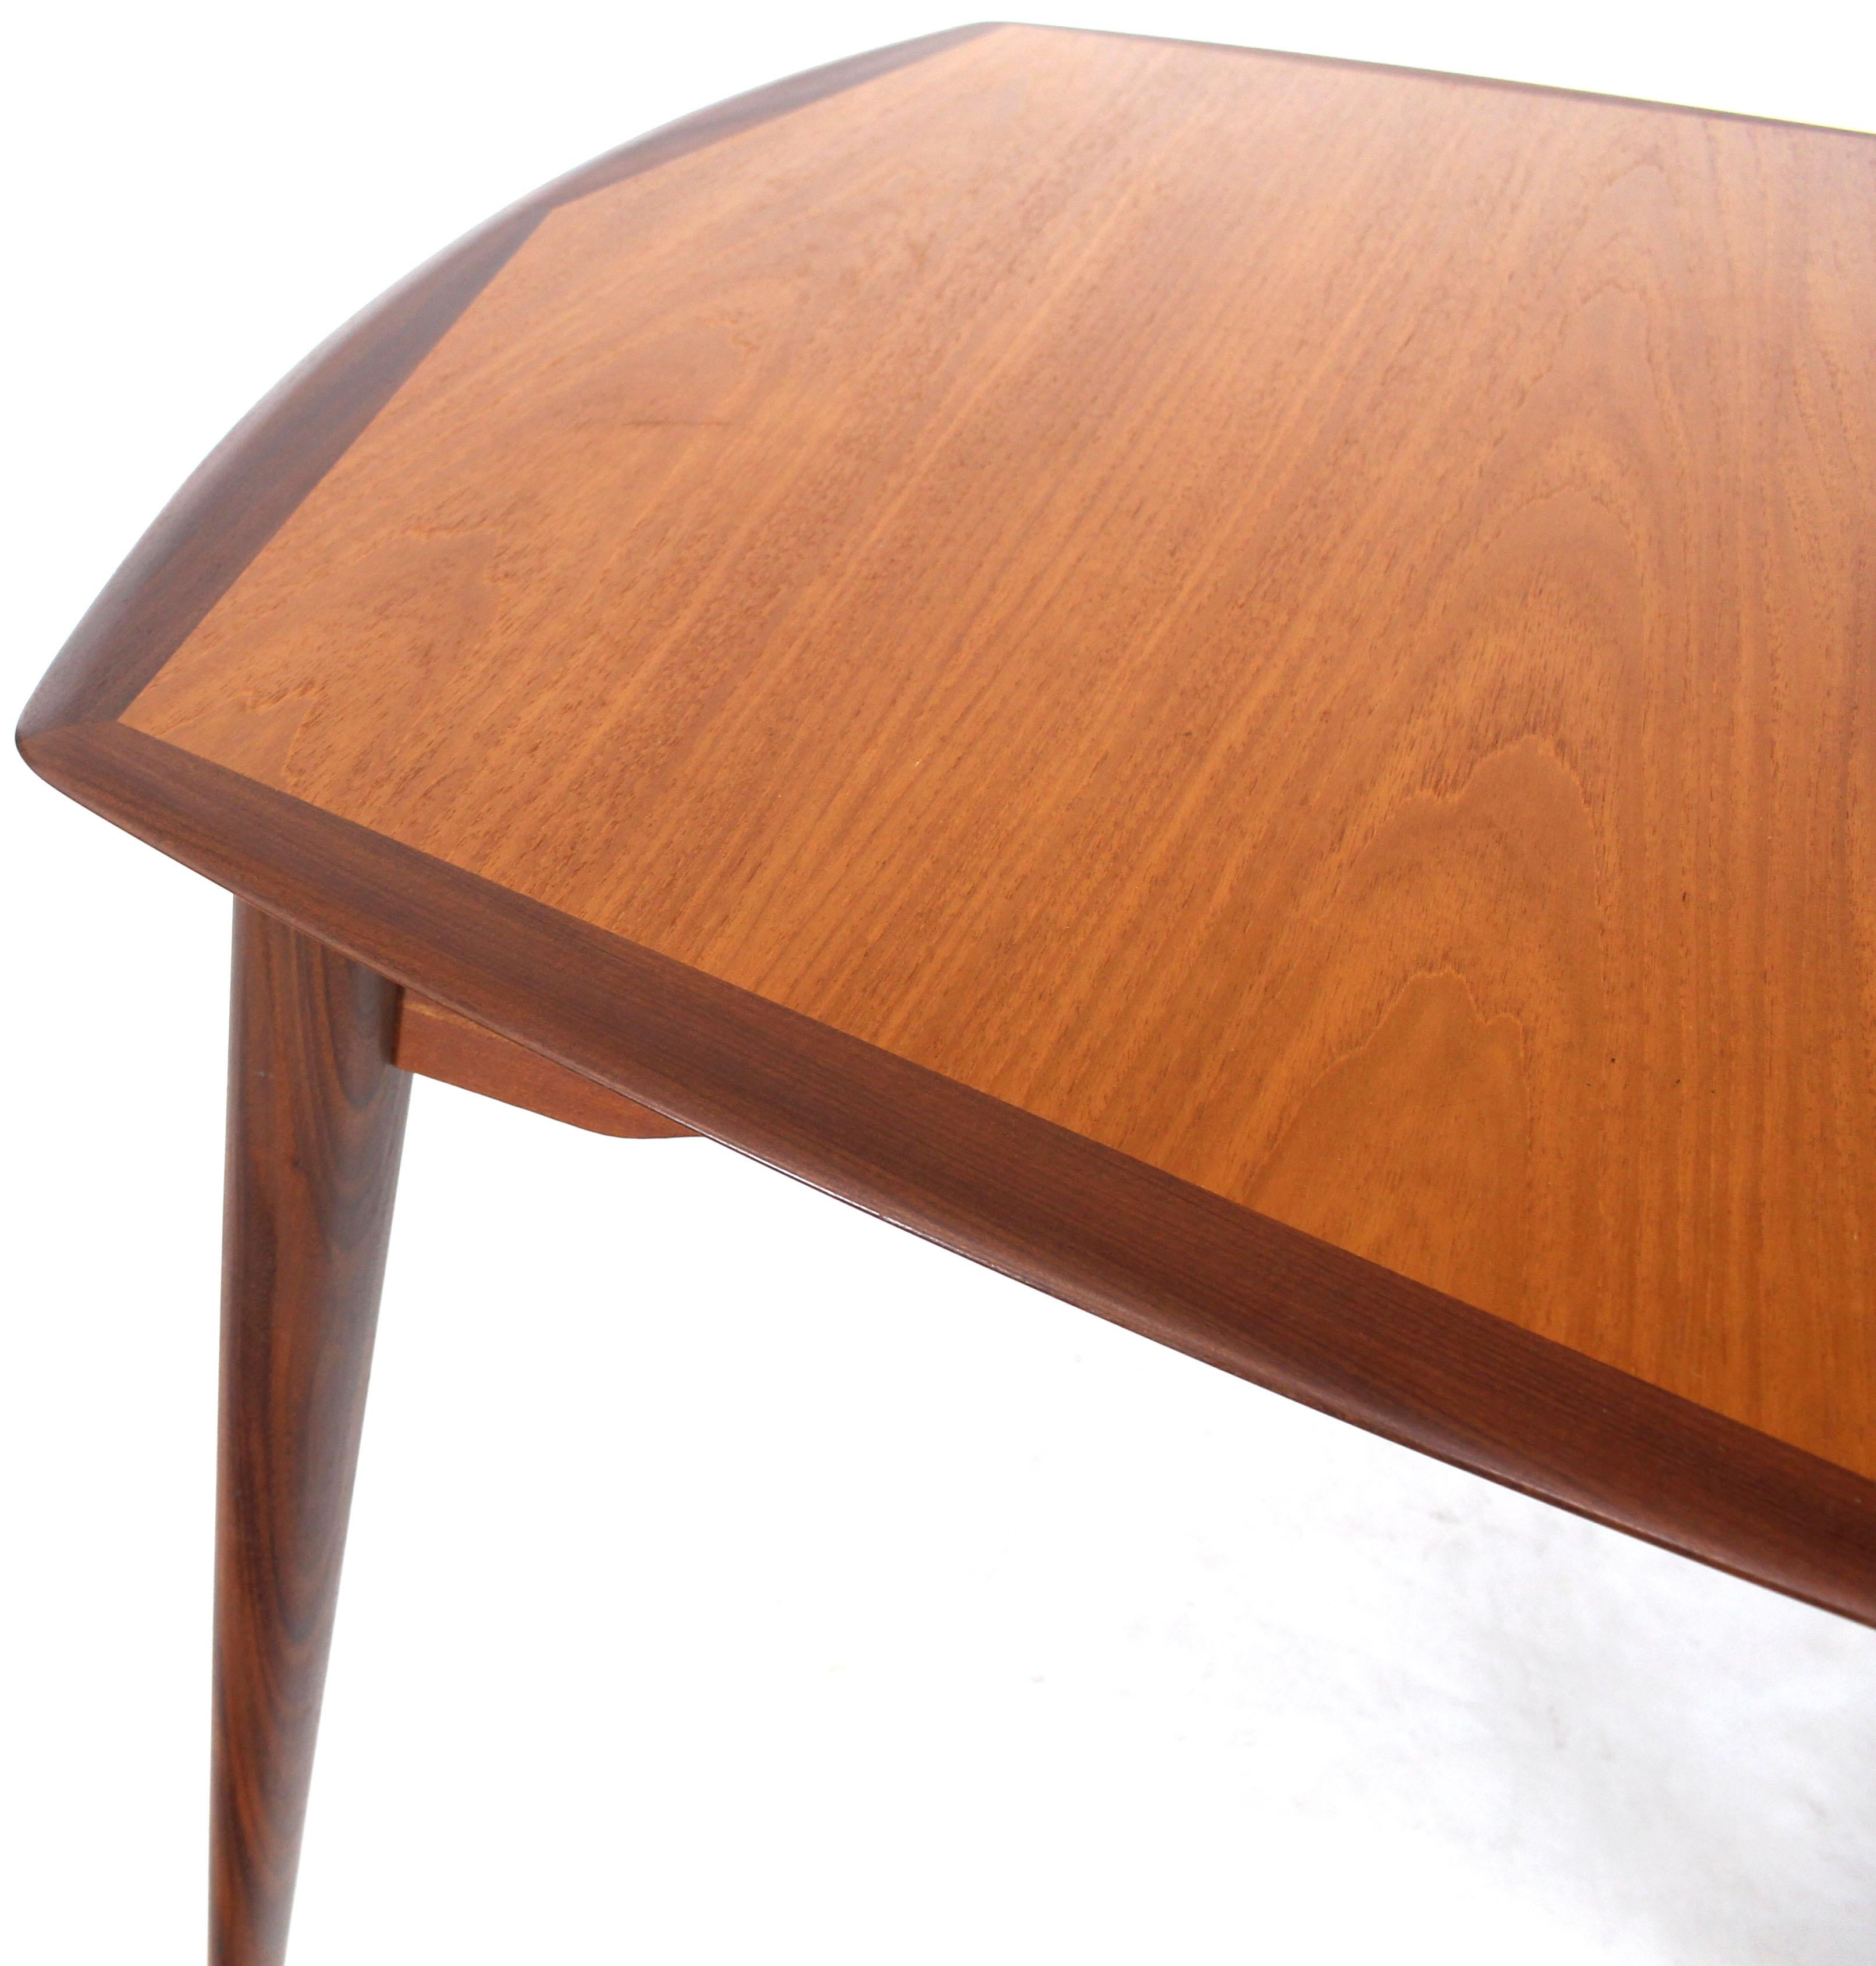 Mid-Century Modern Danish Modern Square Two-Tone Teak Dining Table with 3 Leaves